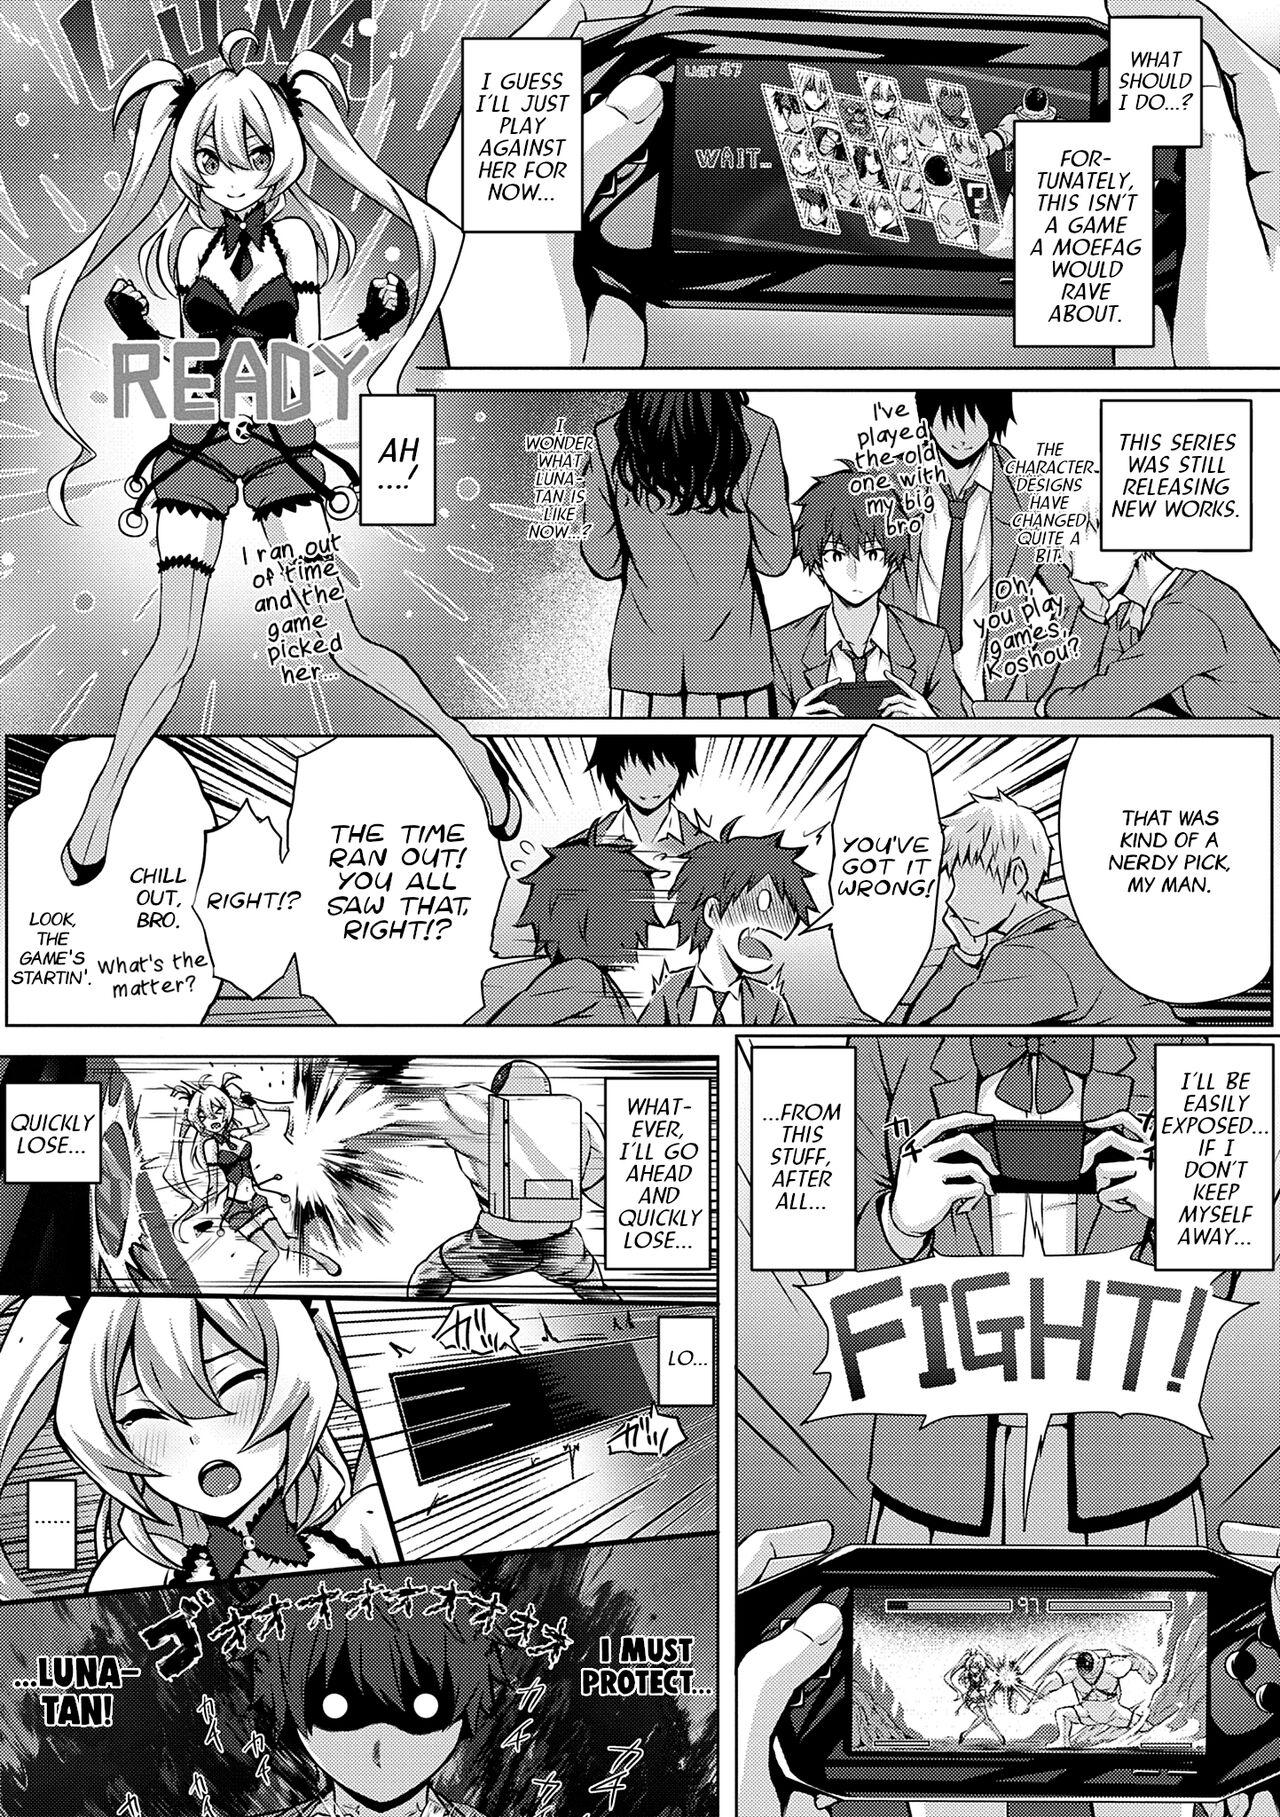 Fucking Pussy Flag Kaishuu wa Totsuzen ni | The Puzzle Pieces Are Suddenly Coming Together Morrita - Page 3